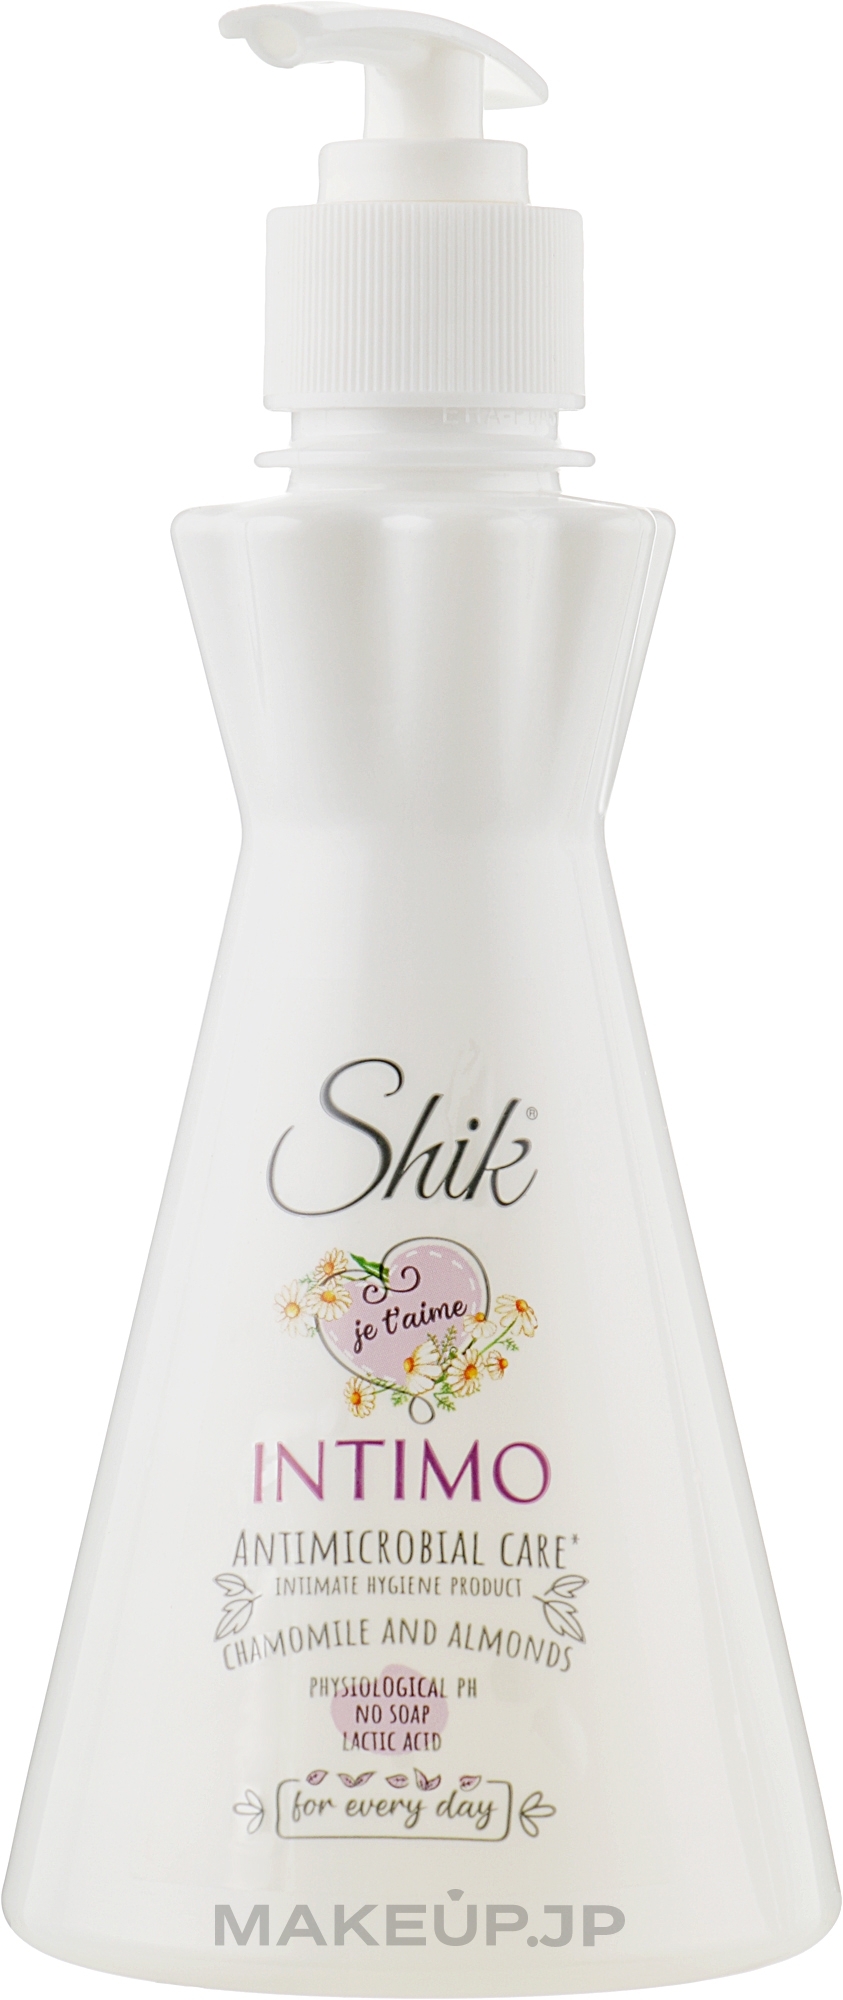 Intimate Wash with Chamomile & Almond Extract - Shik Intimo Antimicrobial Care — photo 300 g